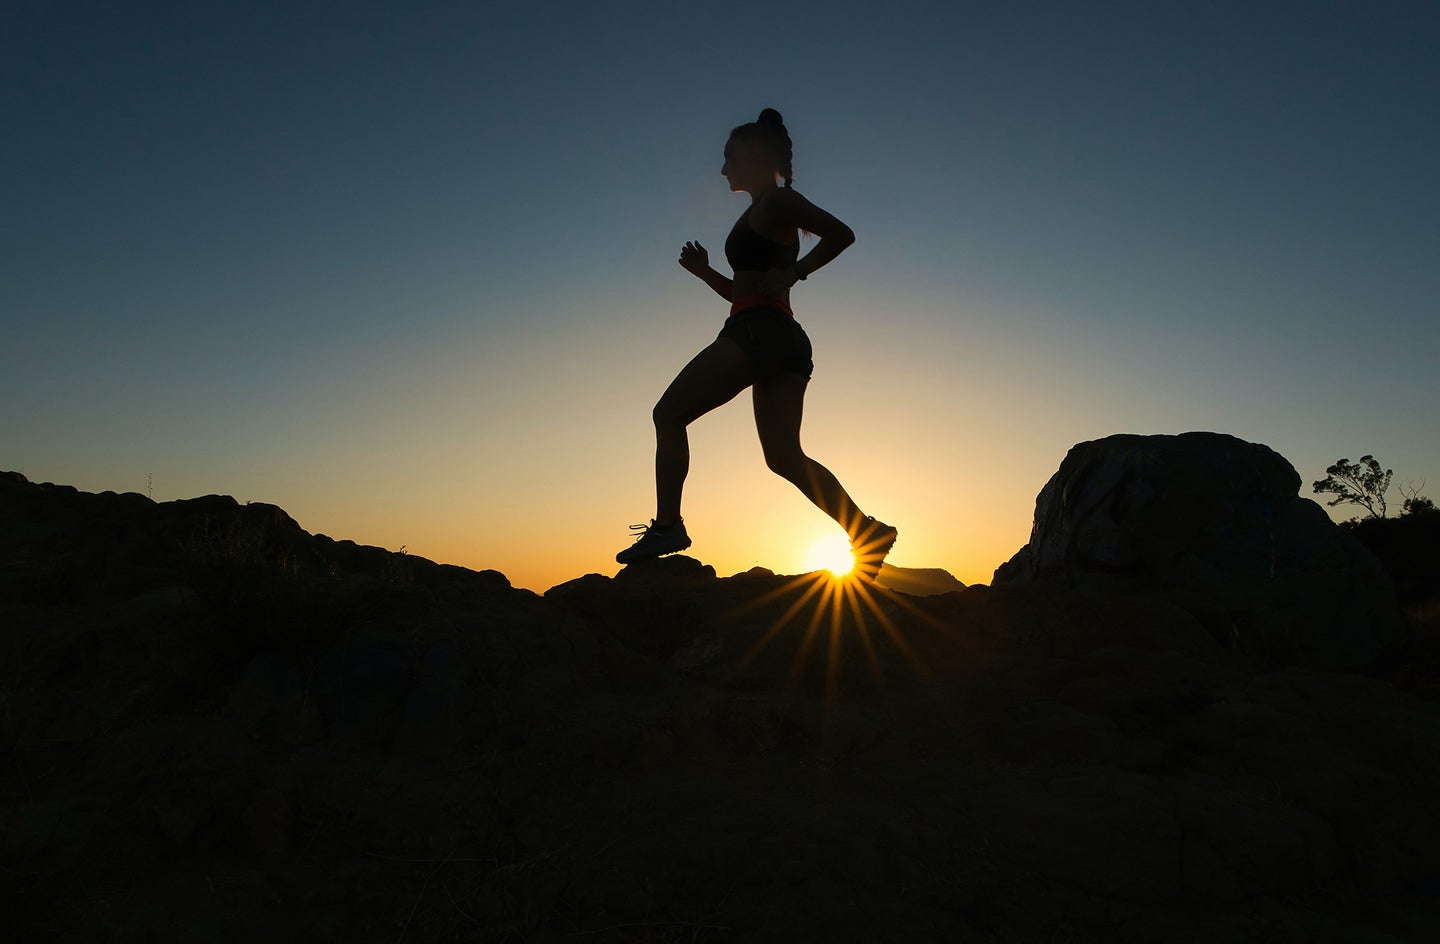 woman running on top of rocks with sun setting behind her